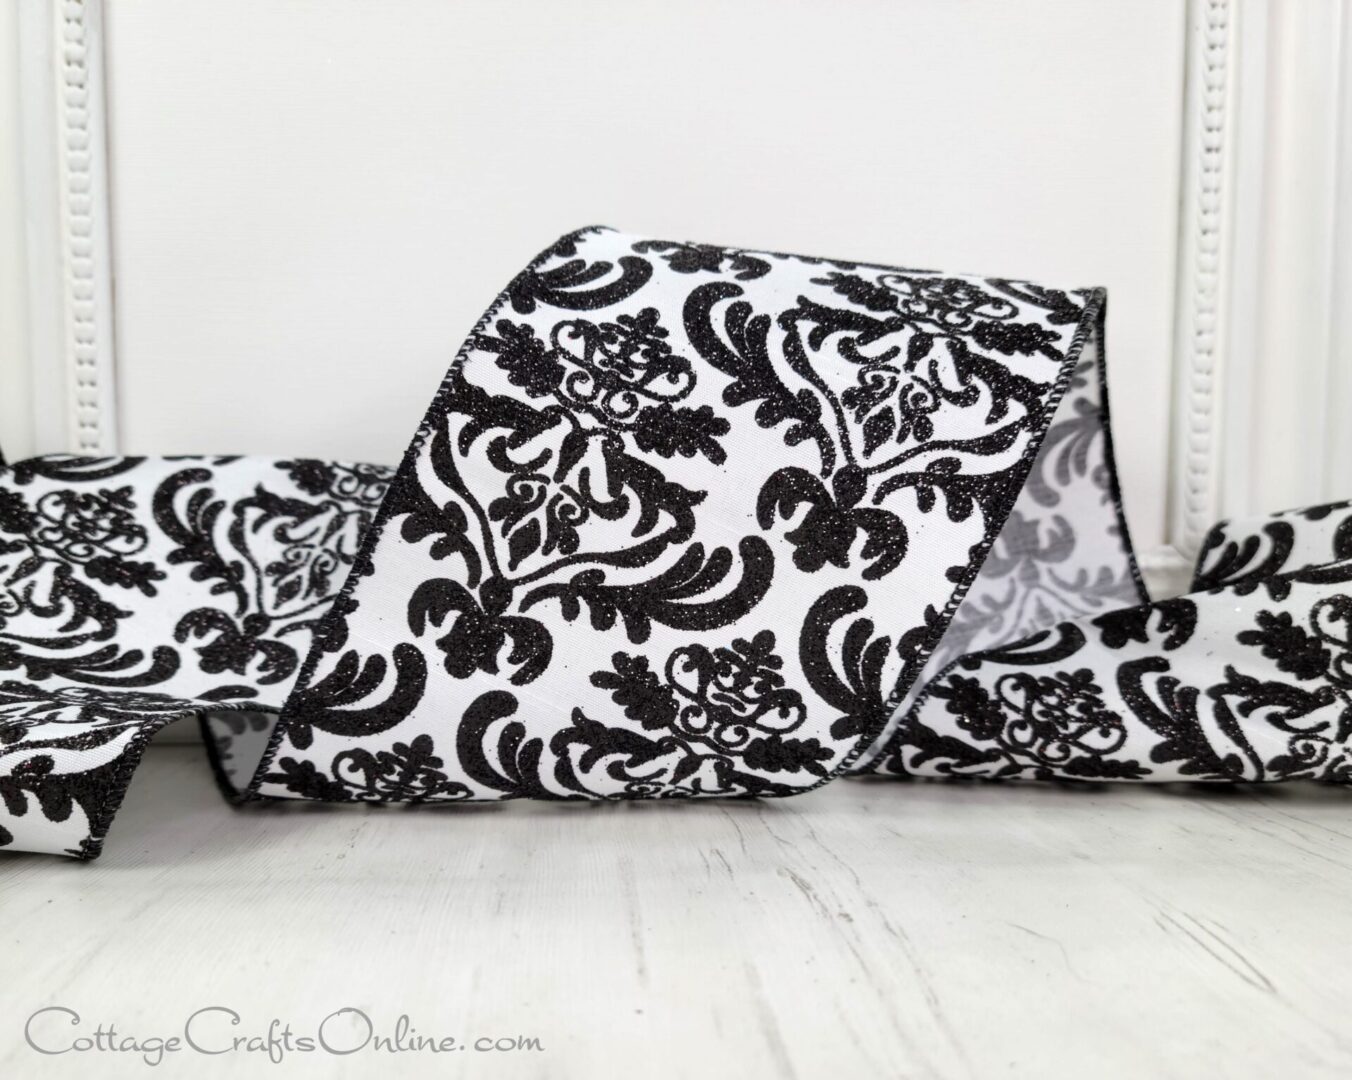 A black and white floral print blanket sitting on the floor.